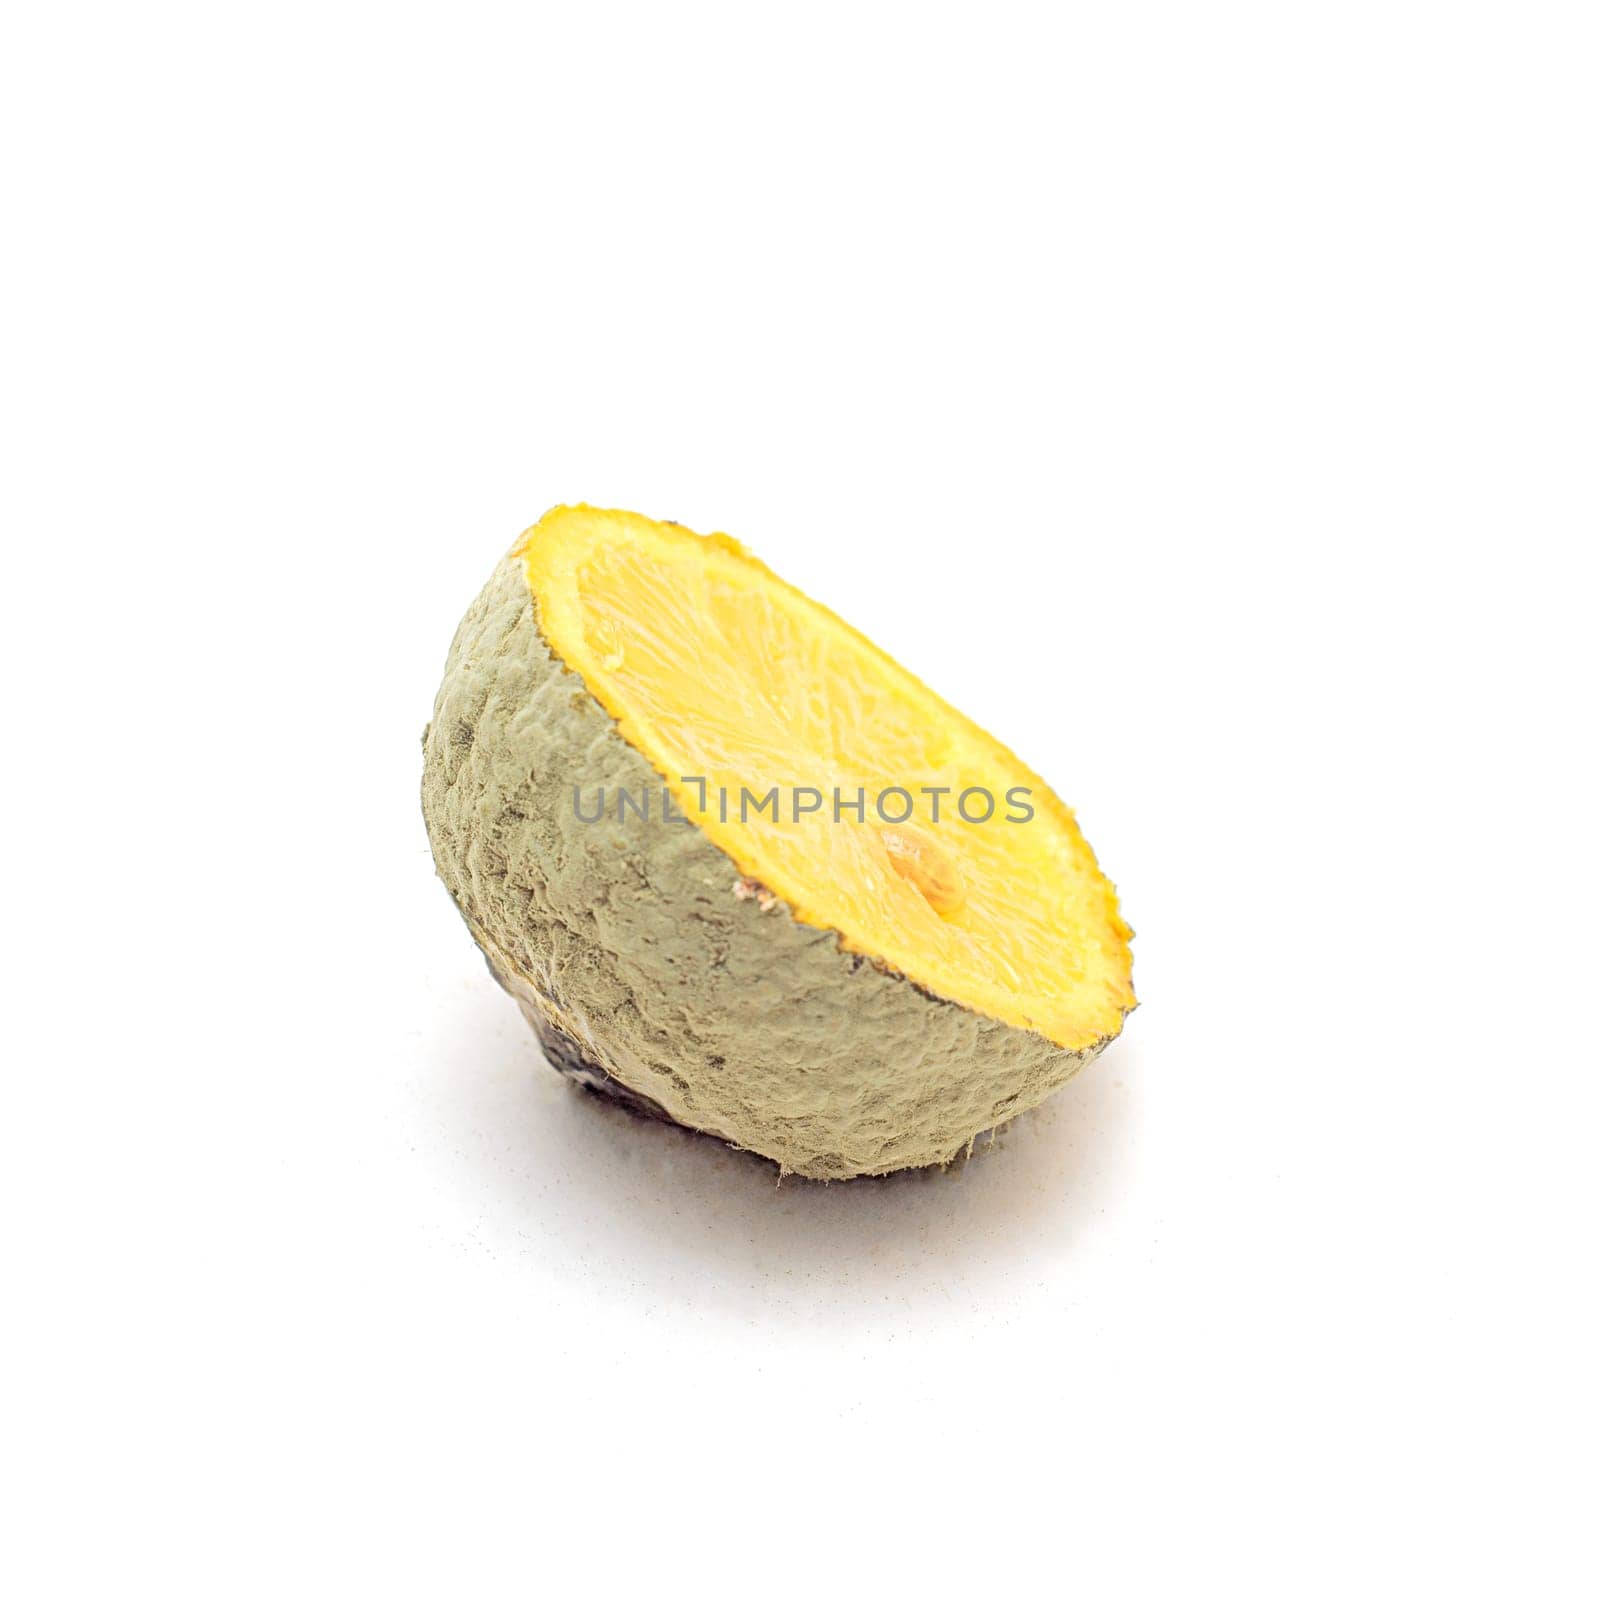 The half of Moldy lemon isolated on white background. by andre_dechapelle